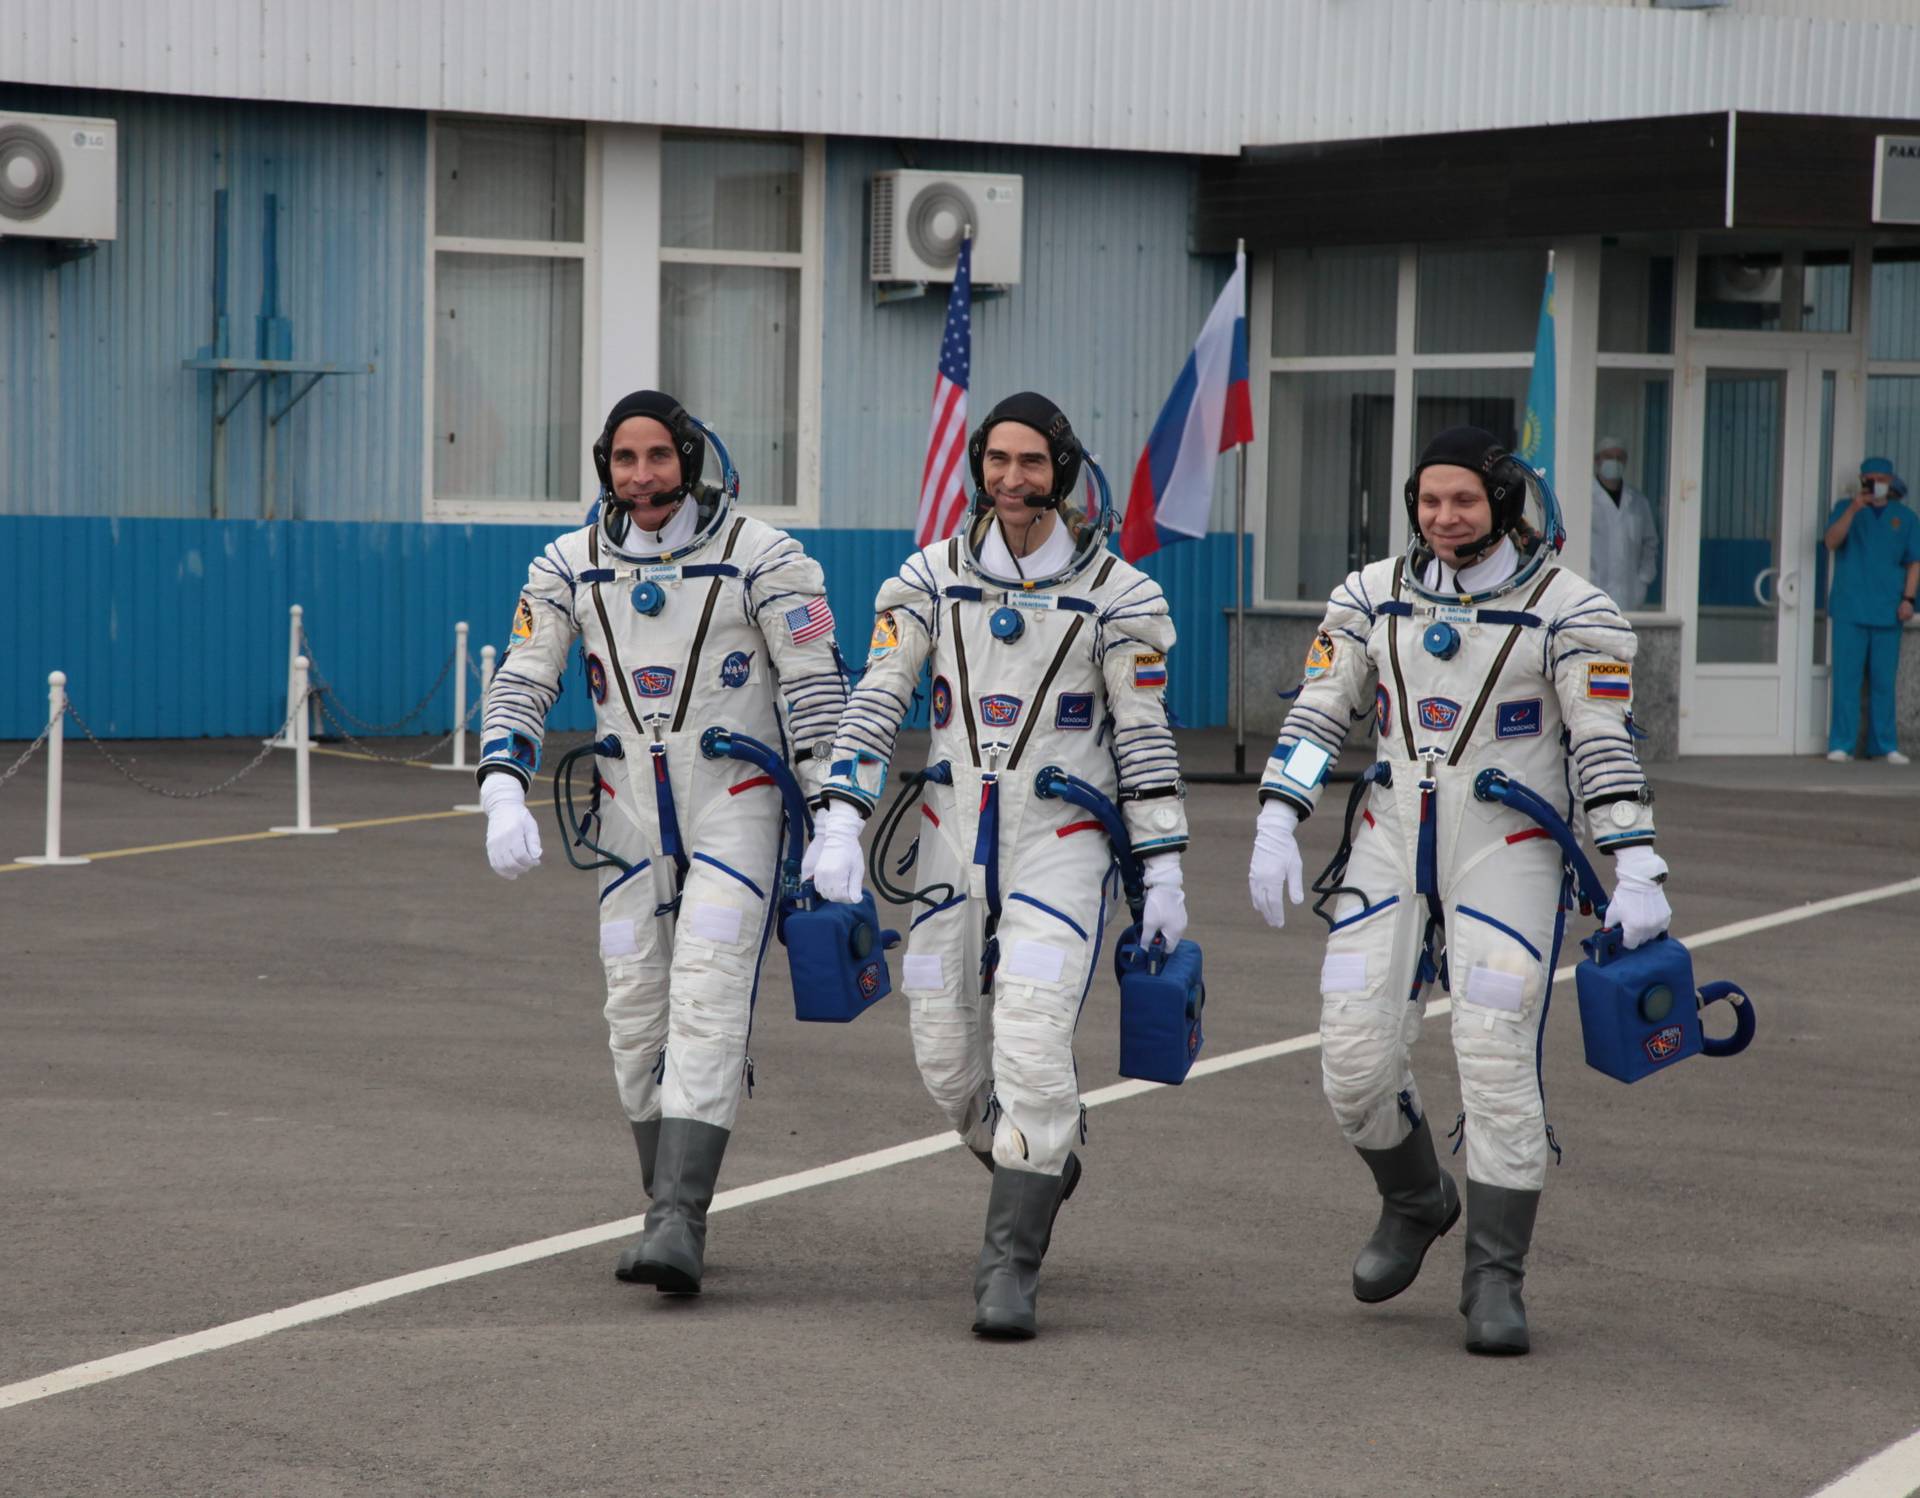 The International Space Station (ISS) crew members walk before leaving to board the Soyuz MS-16 spacecraft for the launch at the Baikonur Cosmodrome